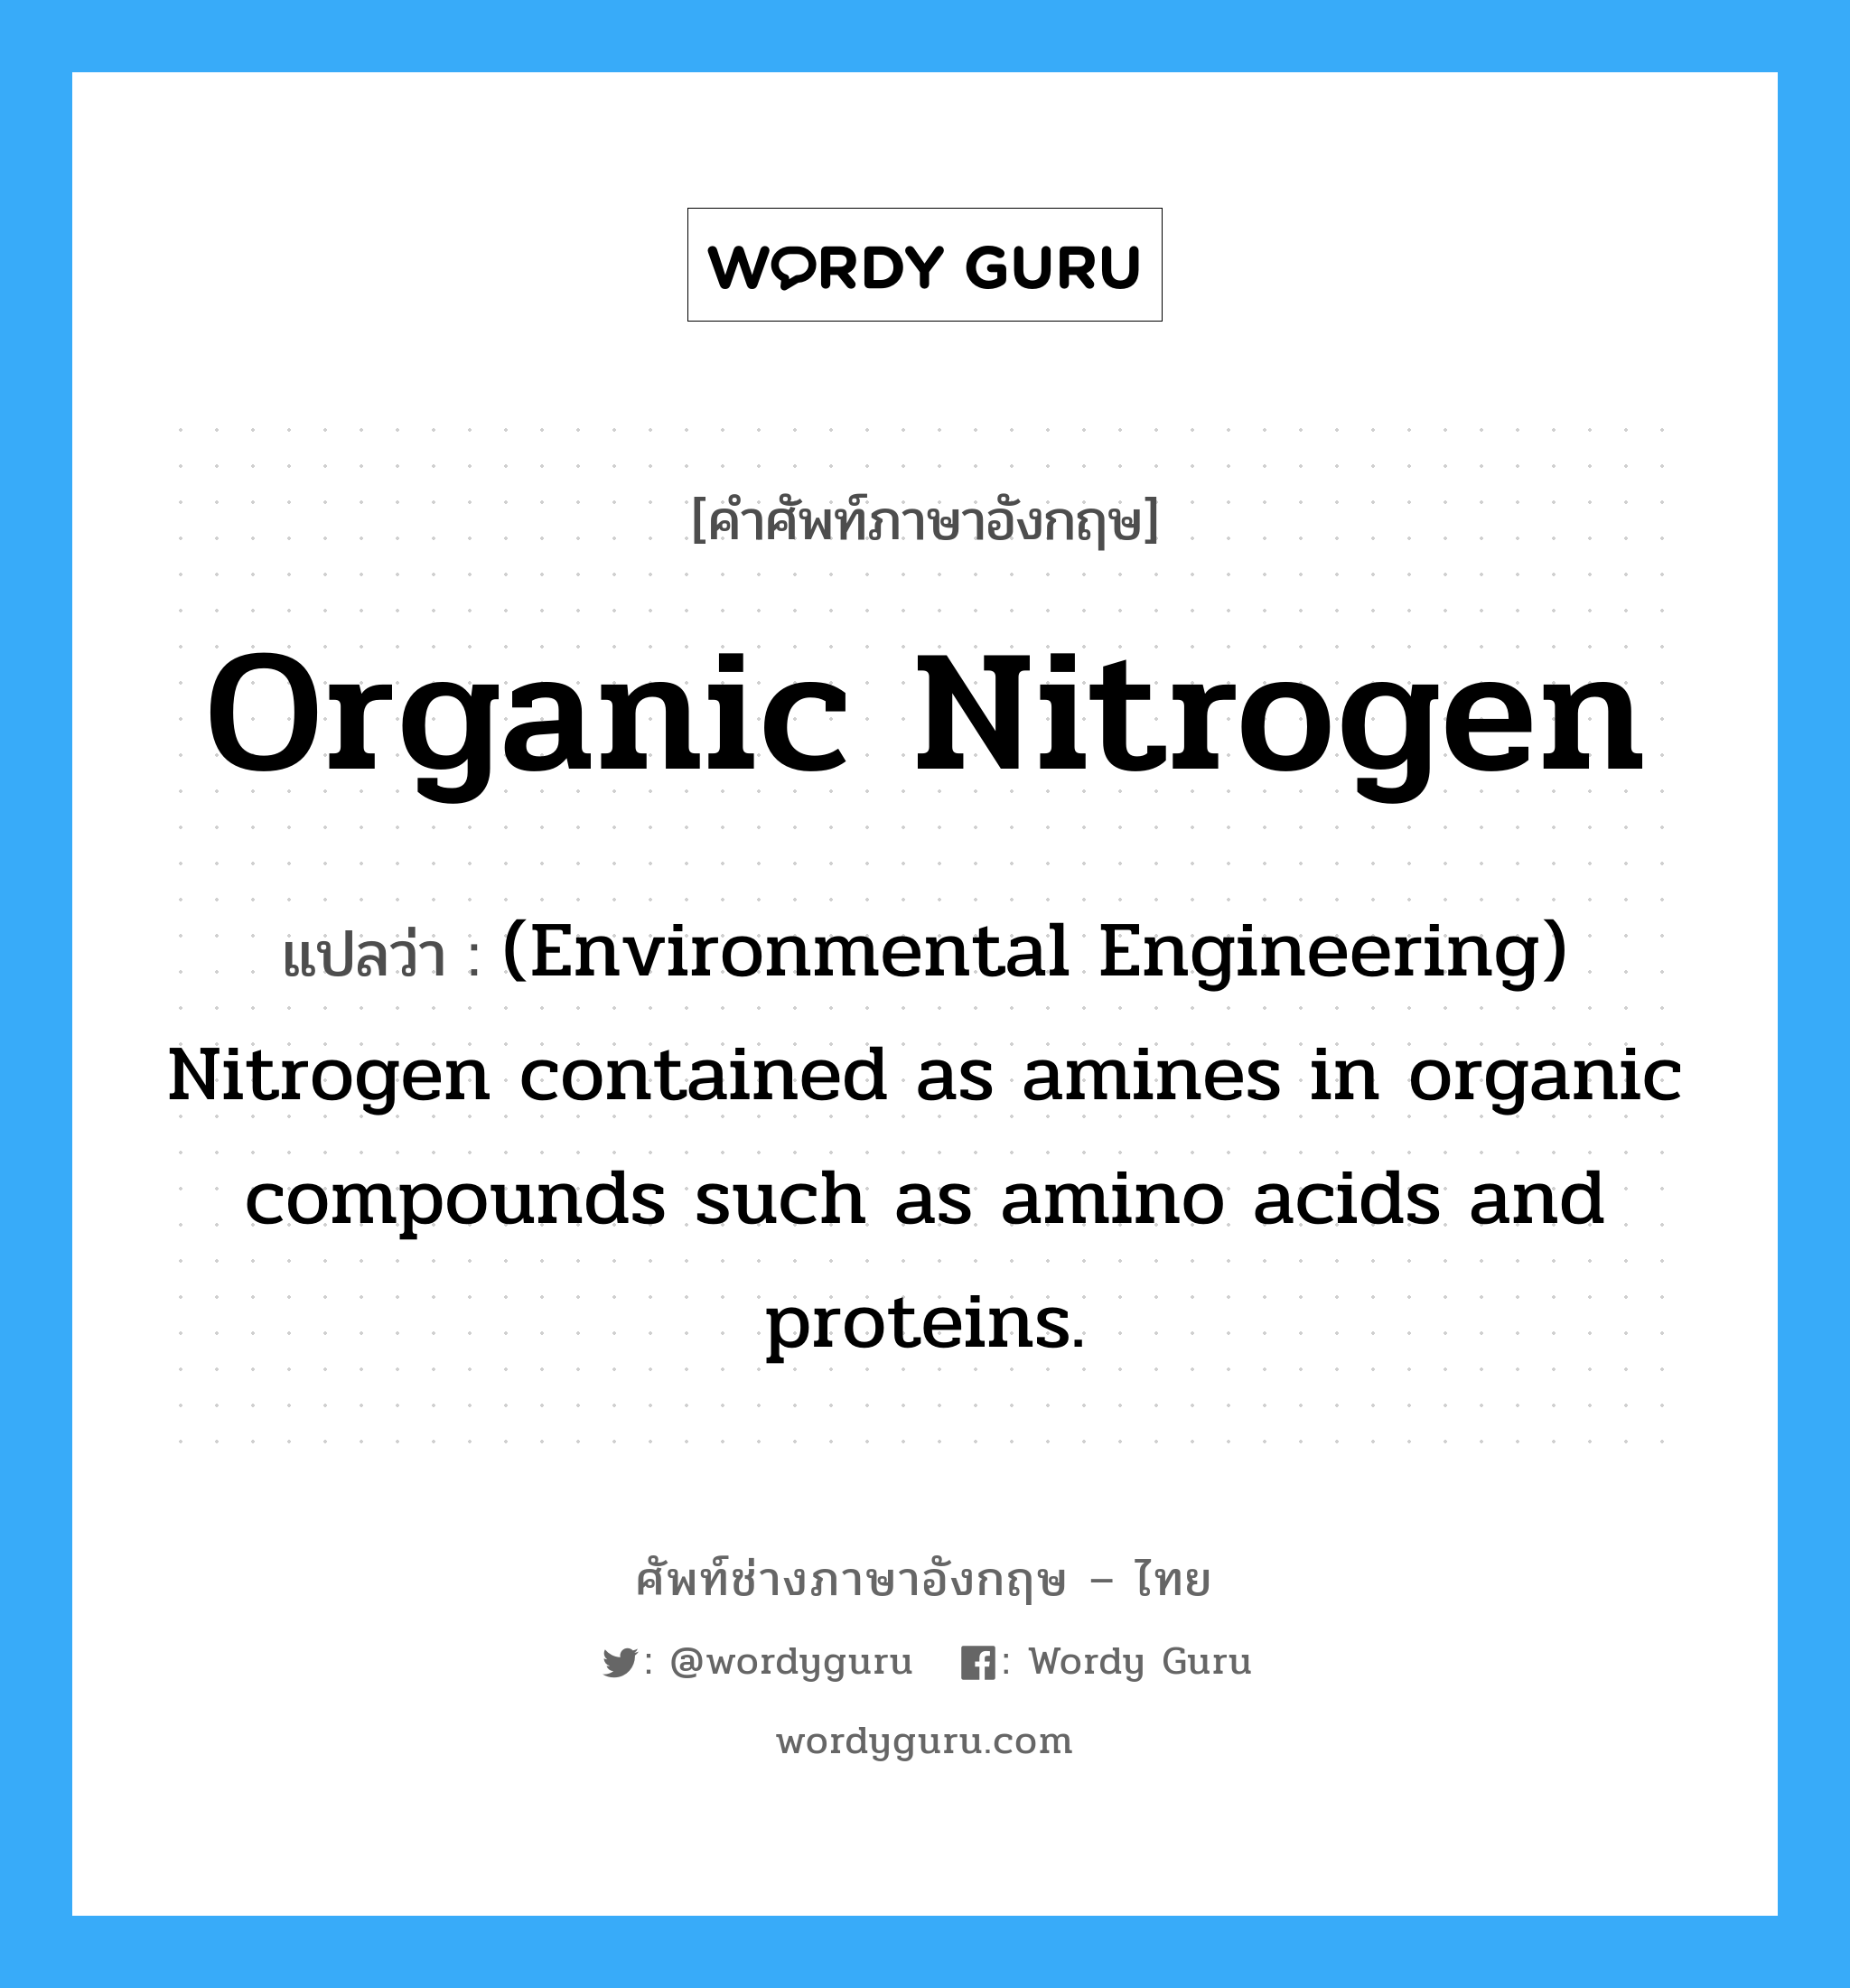 Organic nitrogen แปลว่า?, คำศัพท์ช่างภาษาอังกฤษ - ไทย Organic nitrogen คำศัพท์ภาษาอังกฤษ Organic nitrogen แปลว่า (Environmental Engineering) Nitrogen contained as amines in organic compounds such as amino acids and proteins.